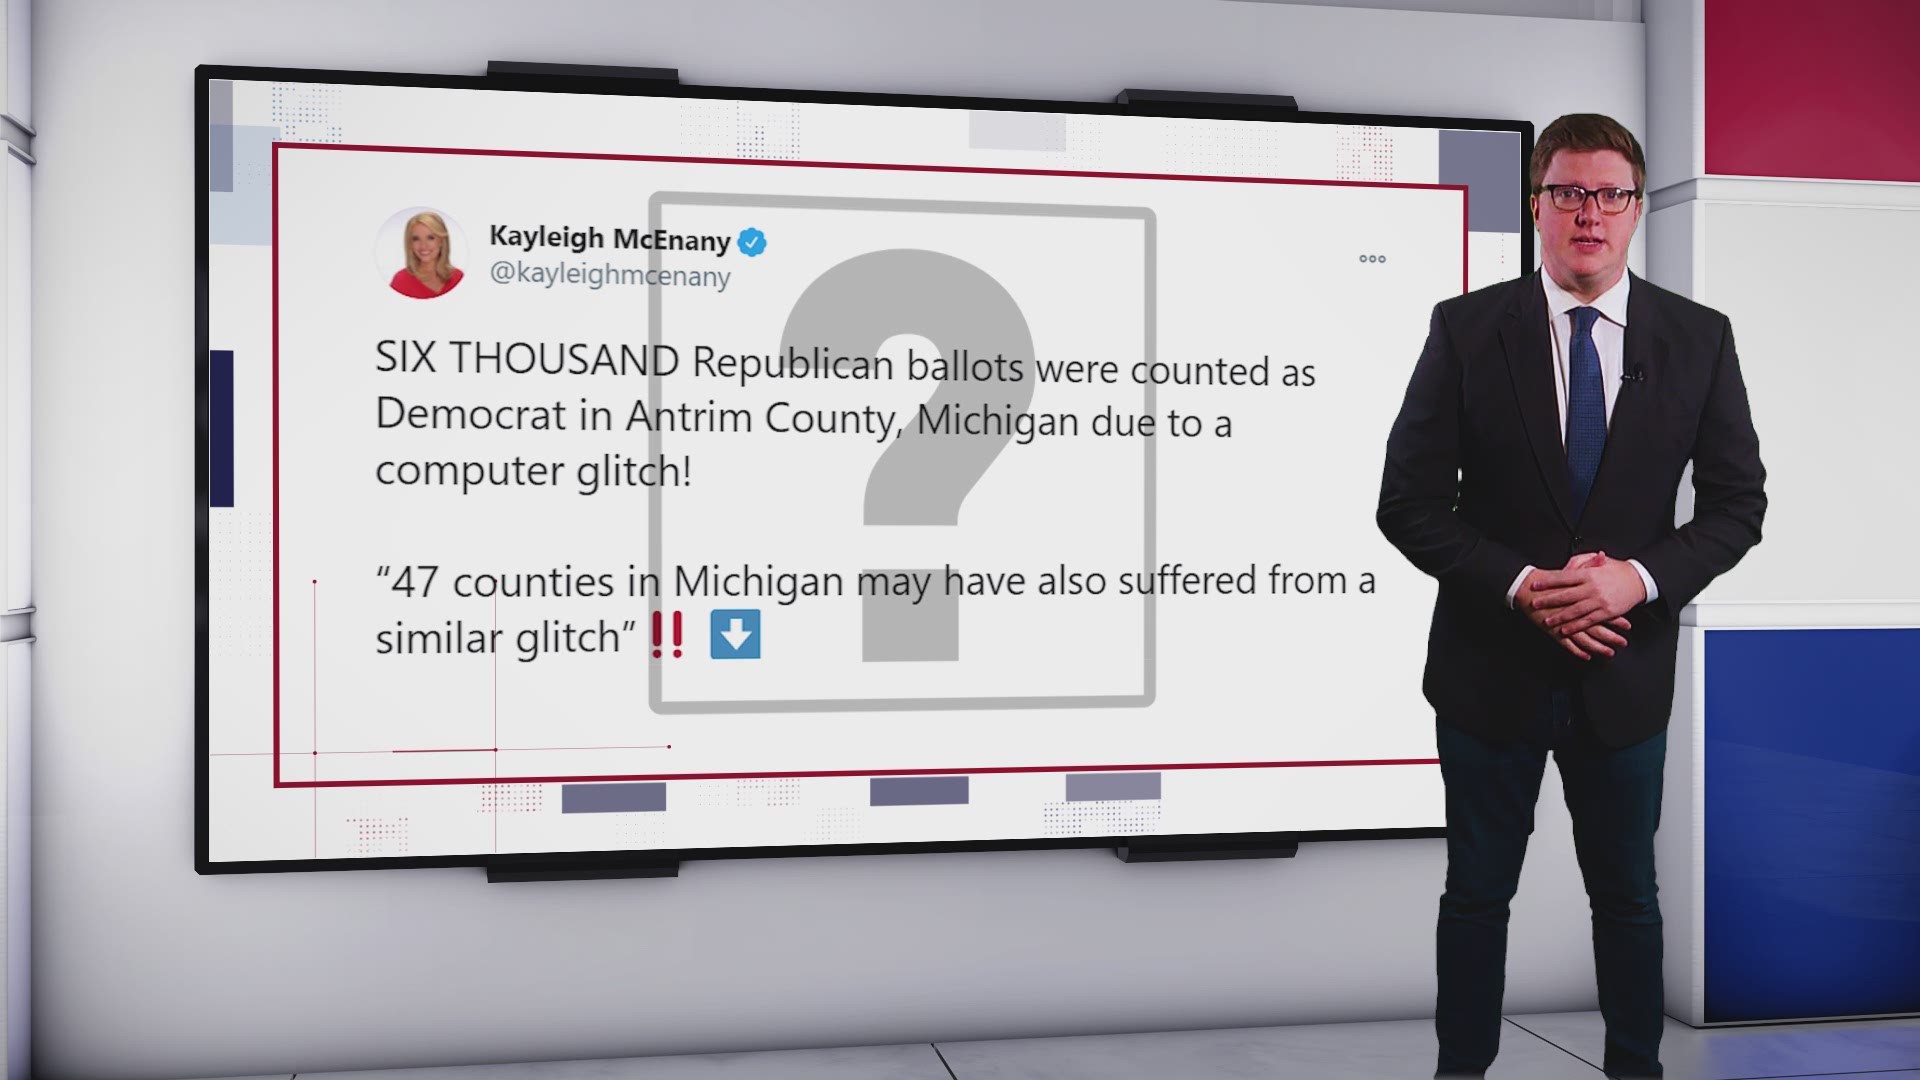 Republicans claimed a 'glitch' on software used across Michigan gave Biden additional votes, but the state said it was human error that did not affect totals.